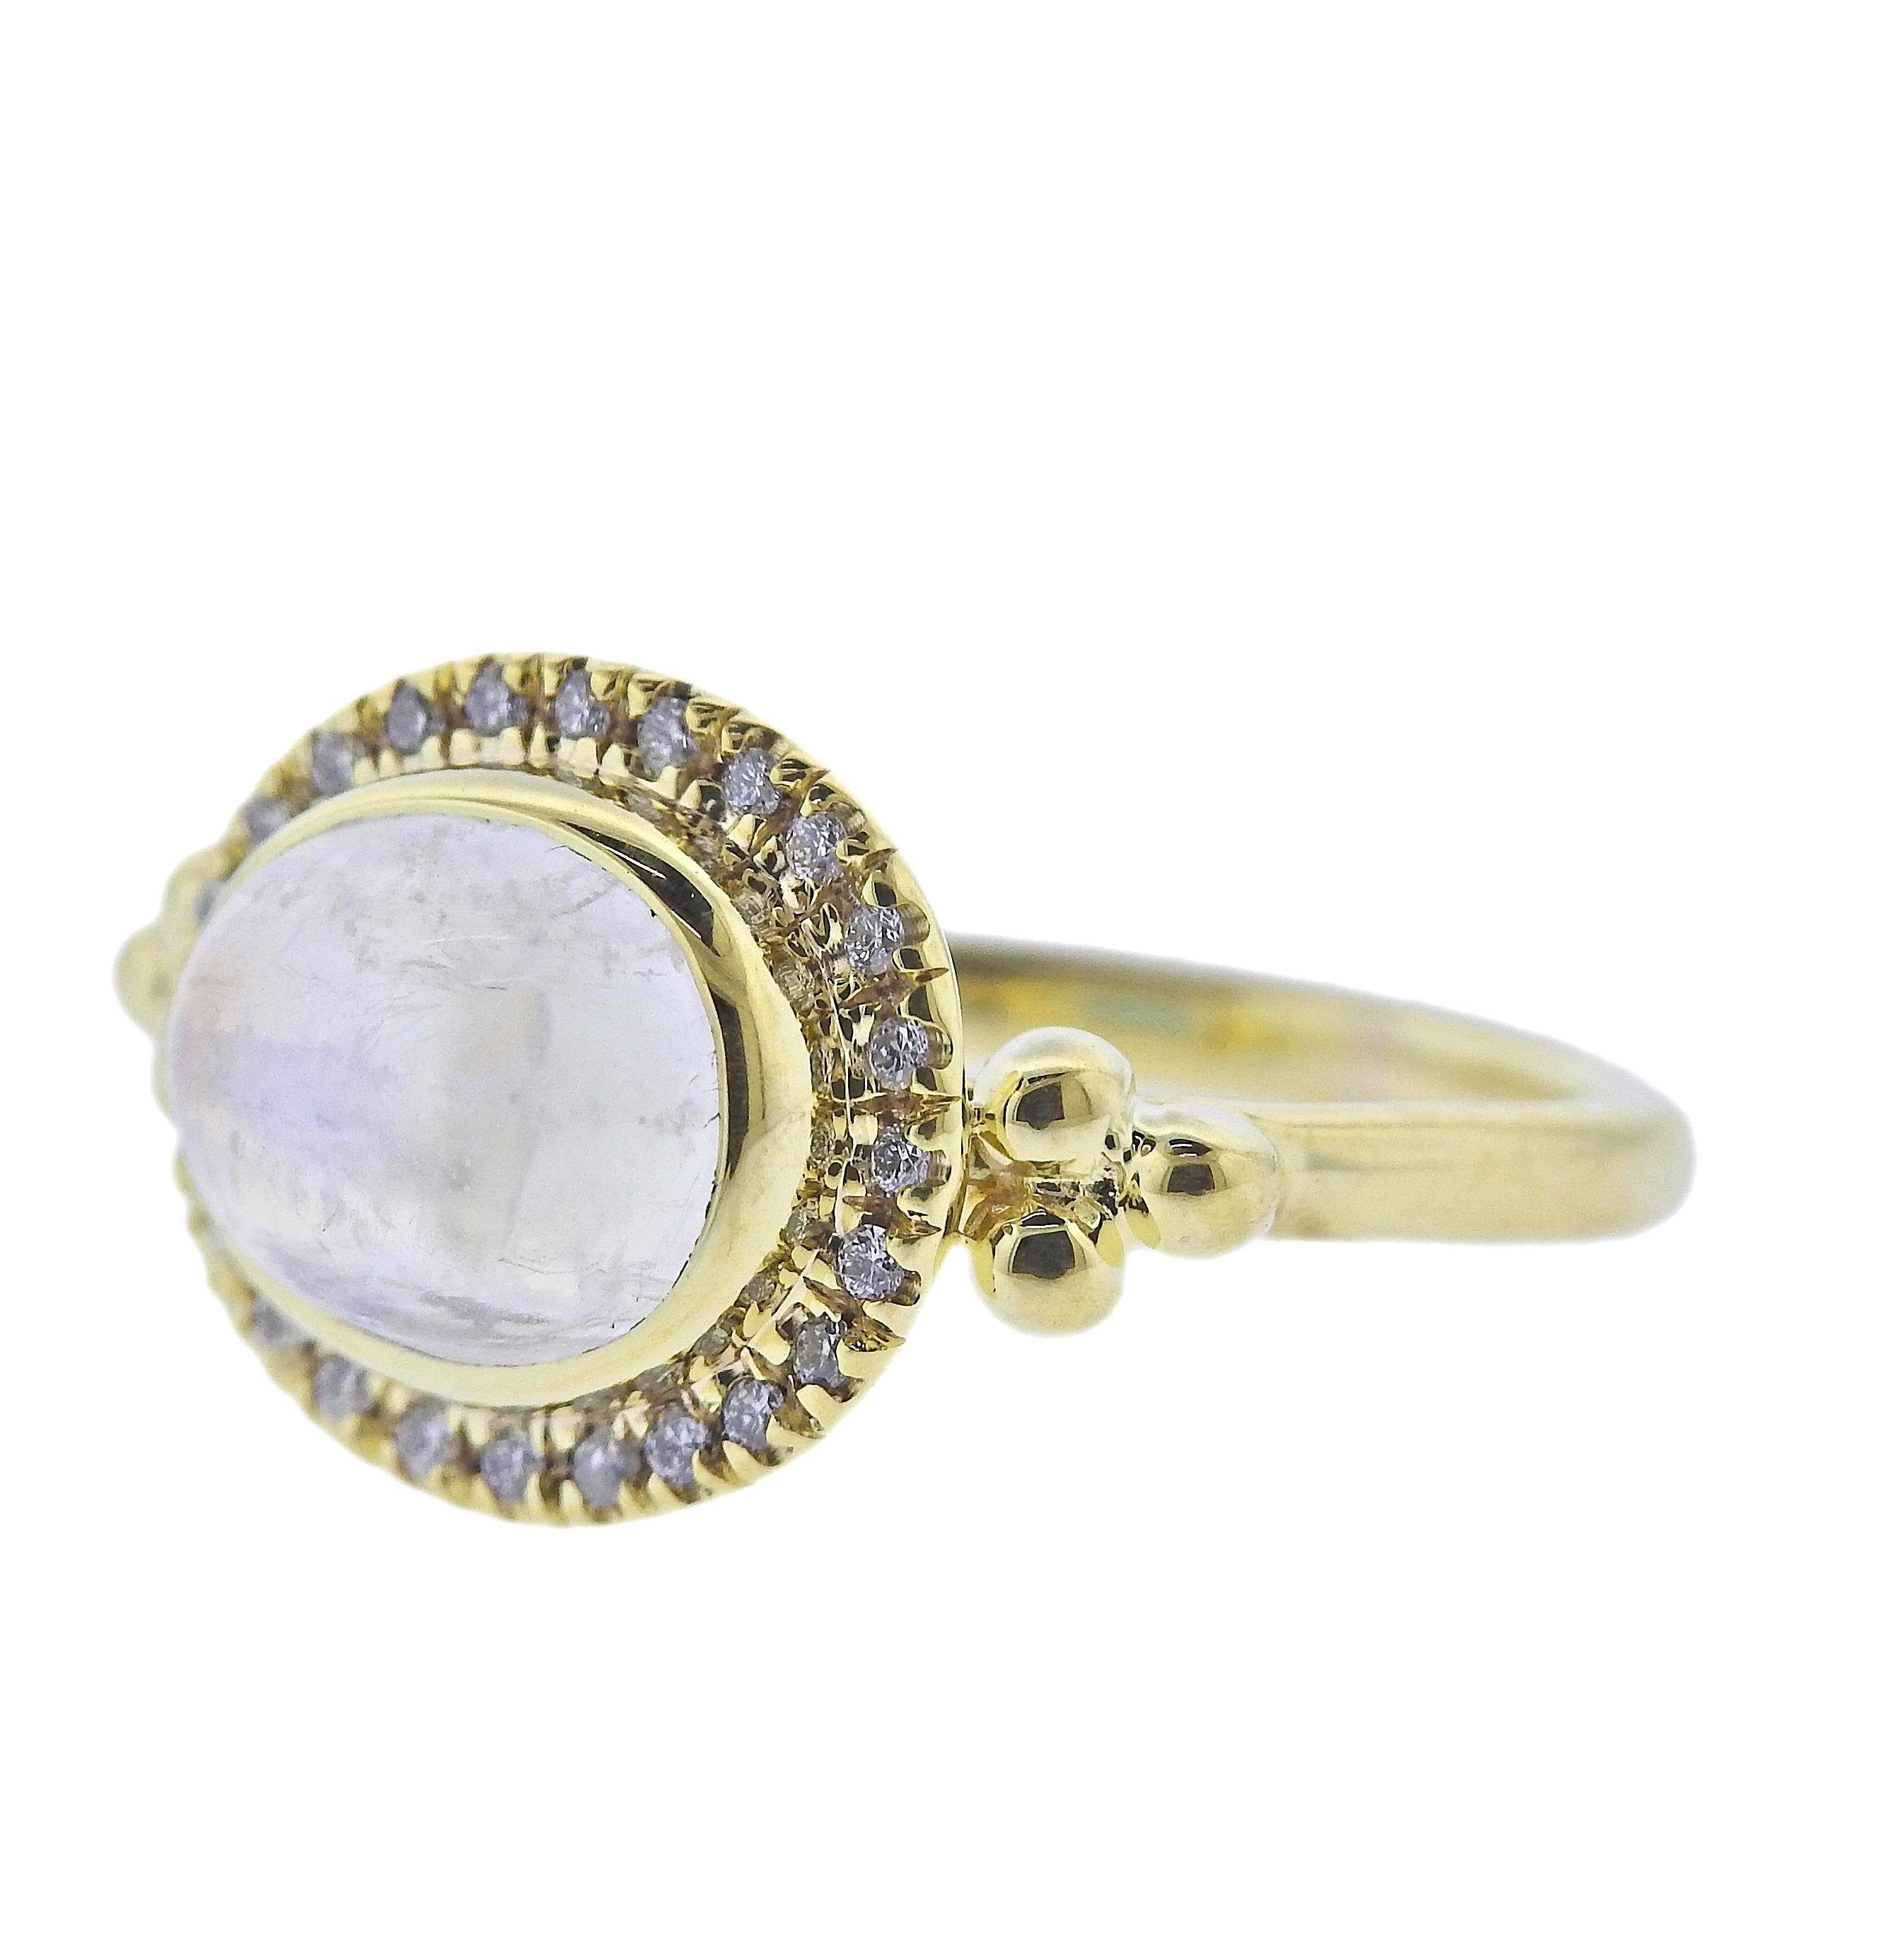 Brand new 14k gold Maz ring, with 0.12ctw H/VS diamonds and moonstone. Ring size 6.75, top is 12 x 20mm, weight 4.1 grams. Marked: MAZ, 14k.